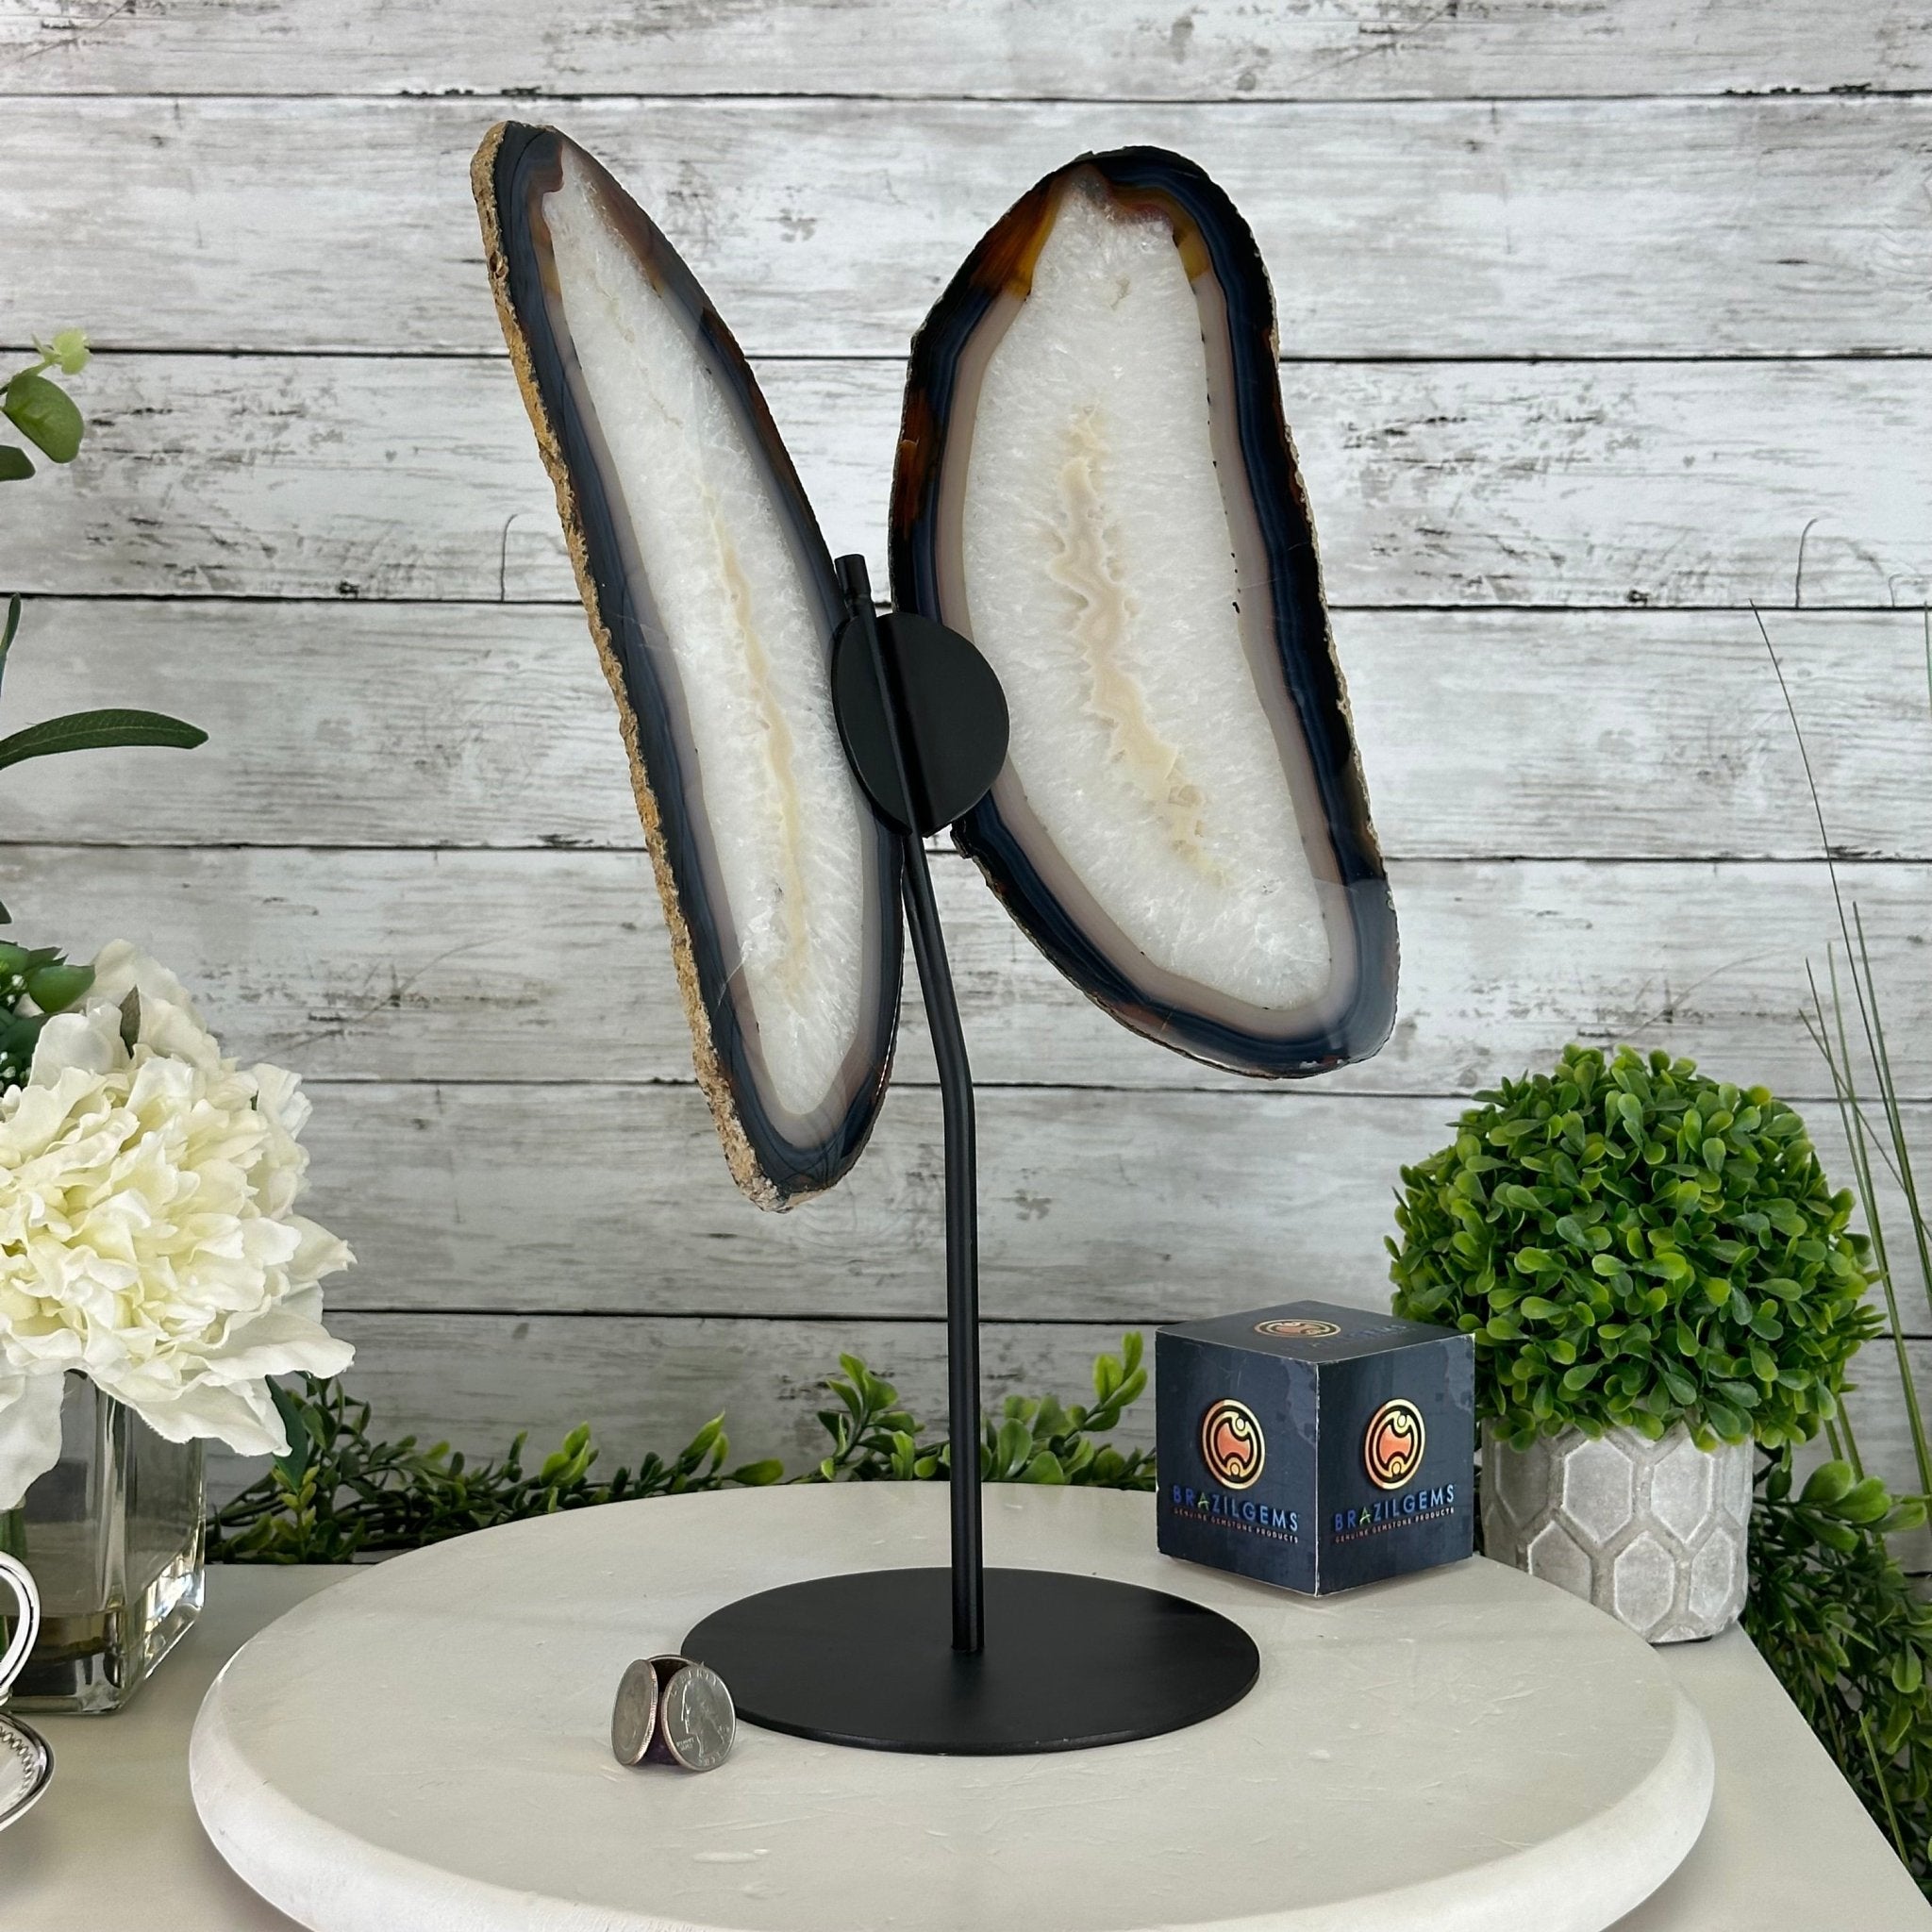 Natural Brazilian Agate "Butterfly Wings", 15.75" Tall #5050NA-084 - Brazil GemsBrazil GemsNatural Brazilian Agate "Butterfly Wings", 15.75" Tall #5050NA-084Agate Butterfly Wings5050NA-084